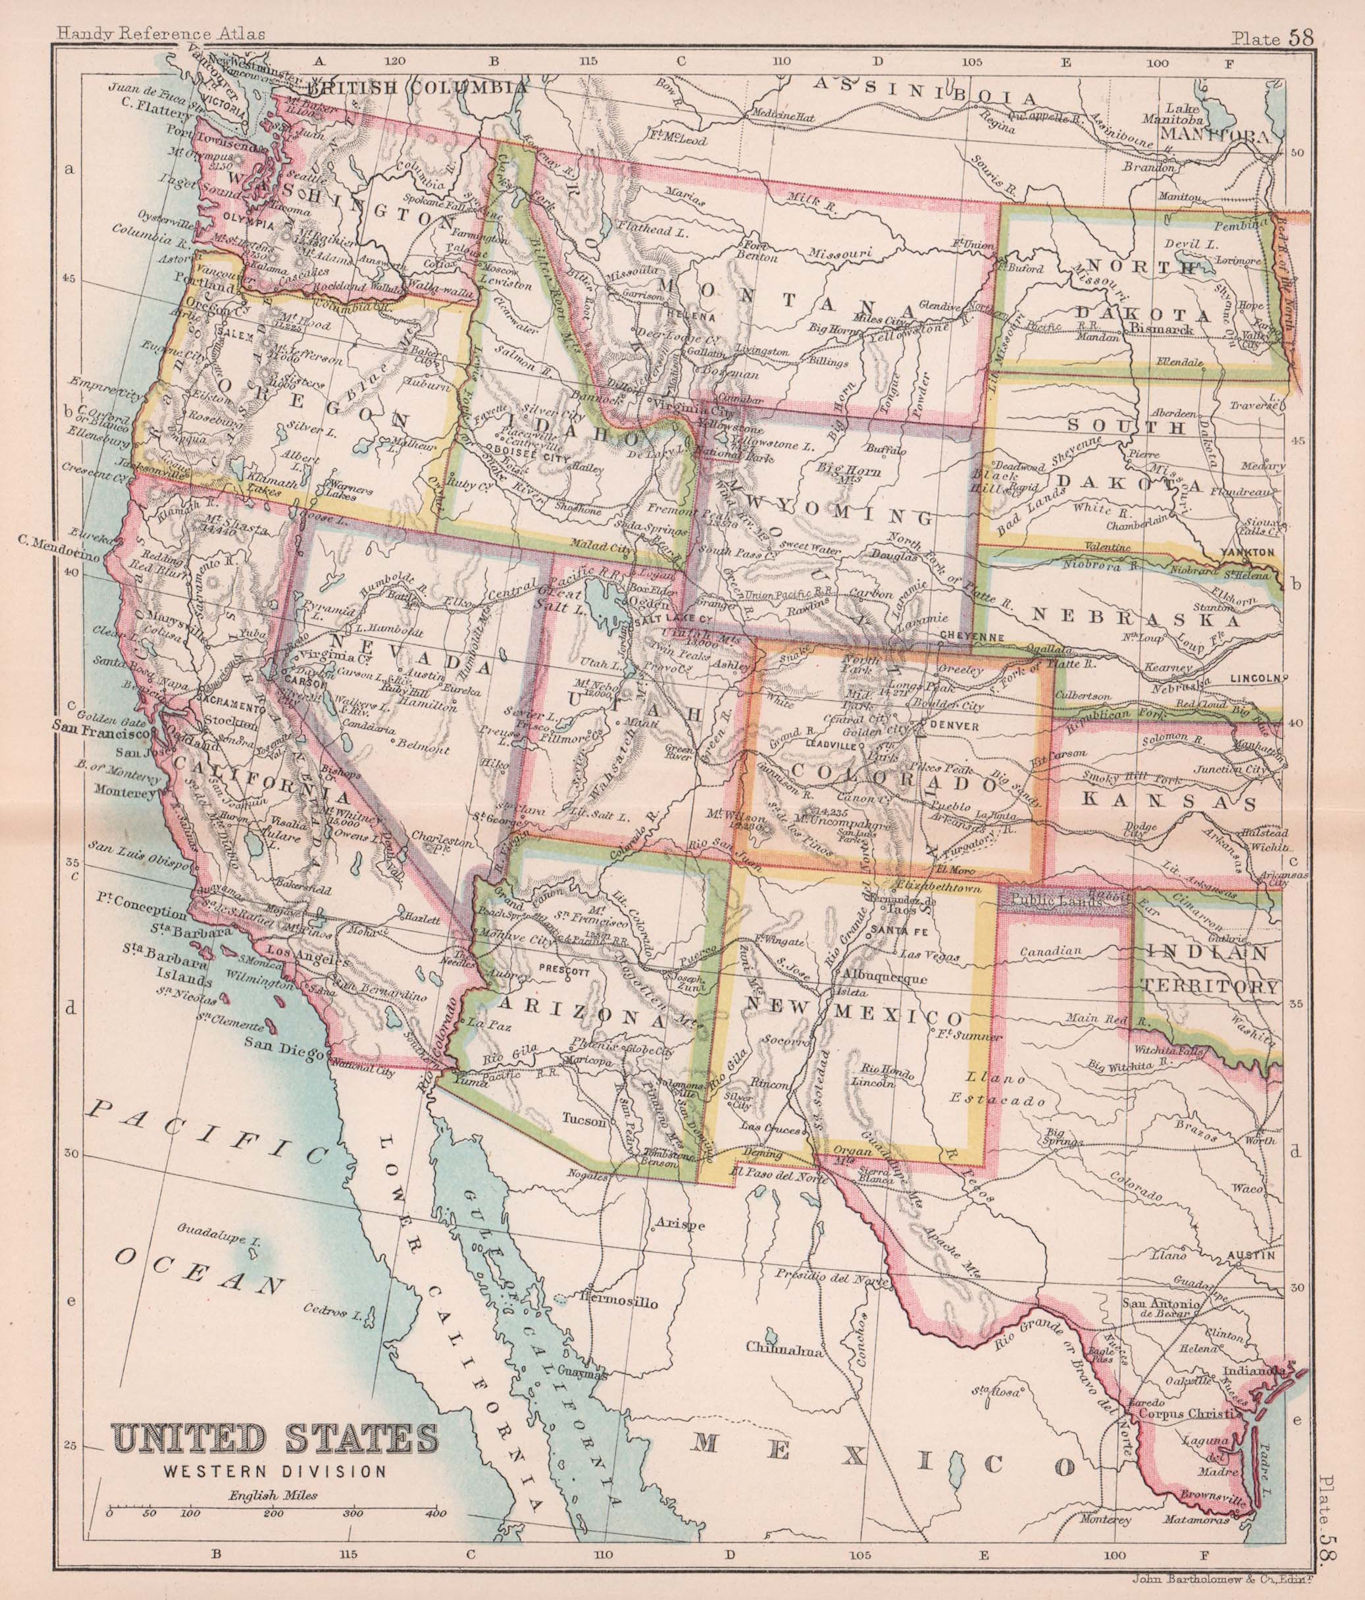 Associate Product United States Western Division. USA. BARTHOLOMEW 1893 old antique map chart